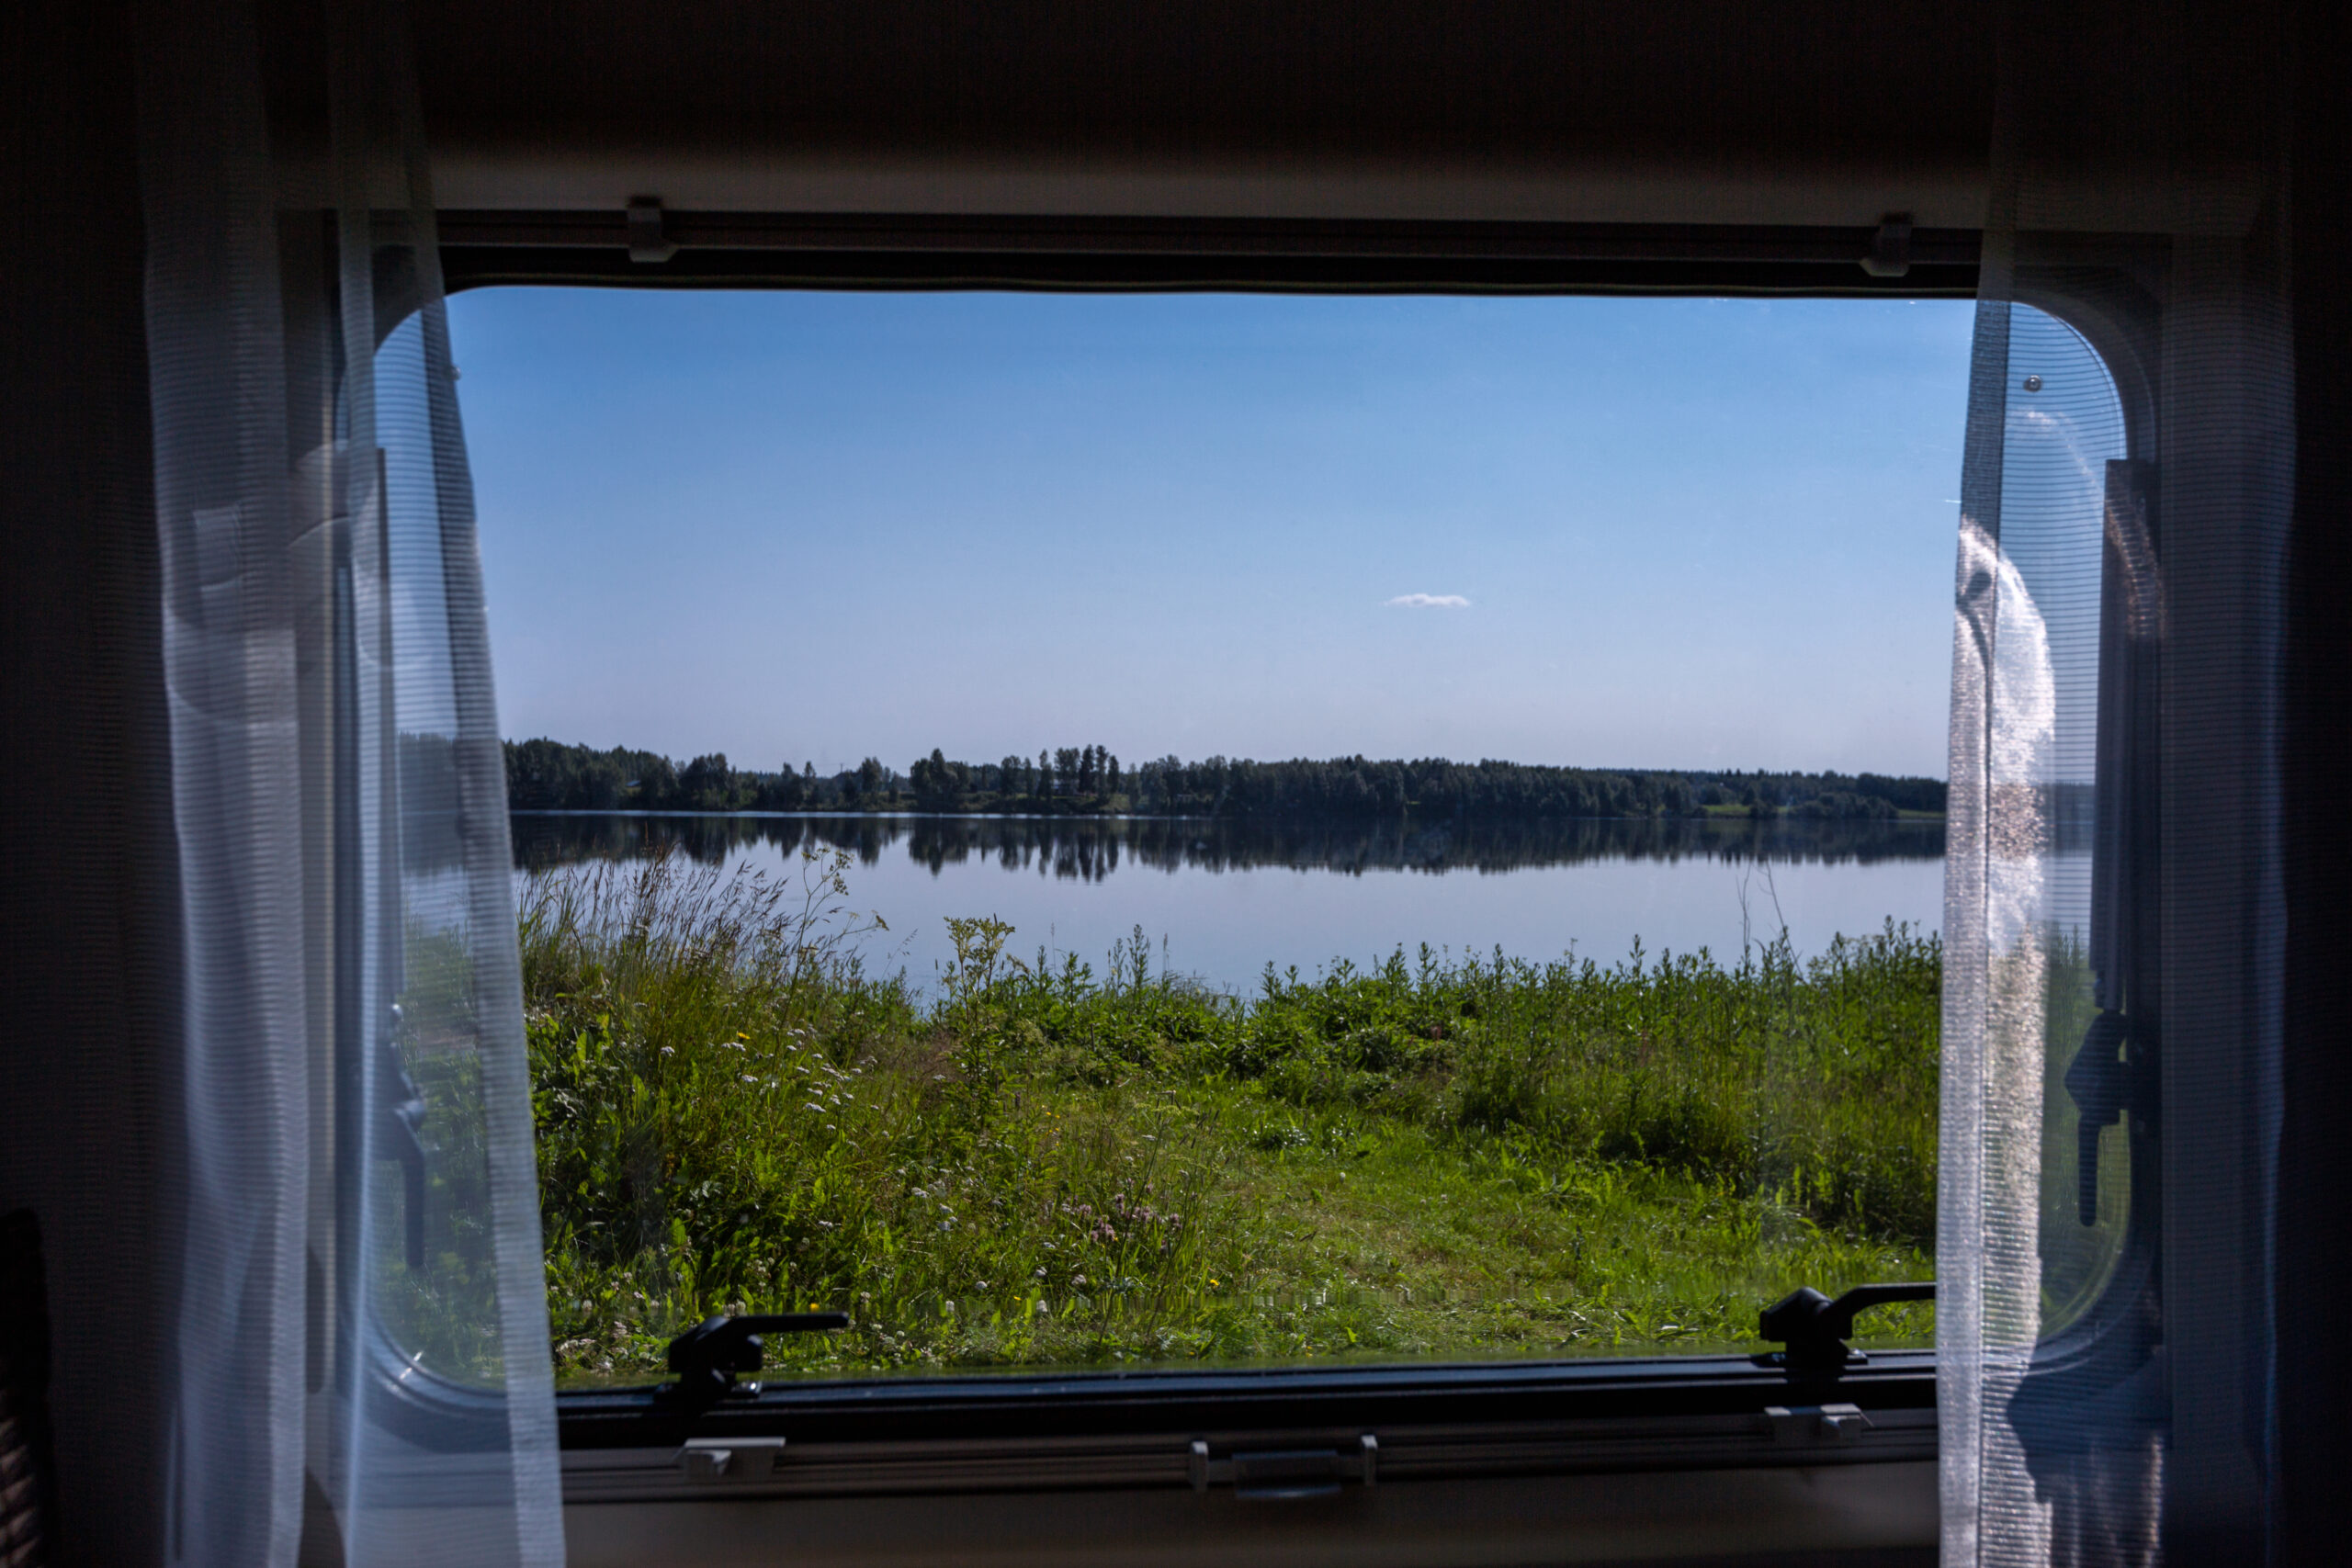 RV window replacement - looking out at a lake view